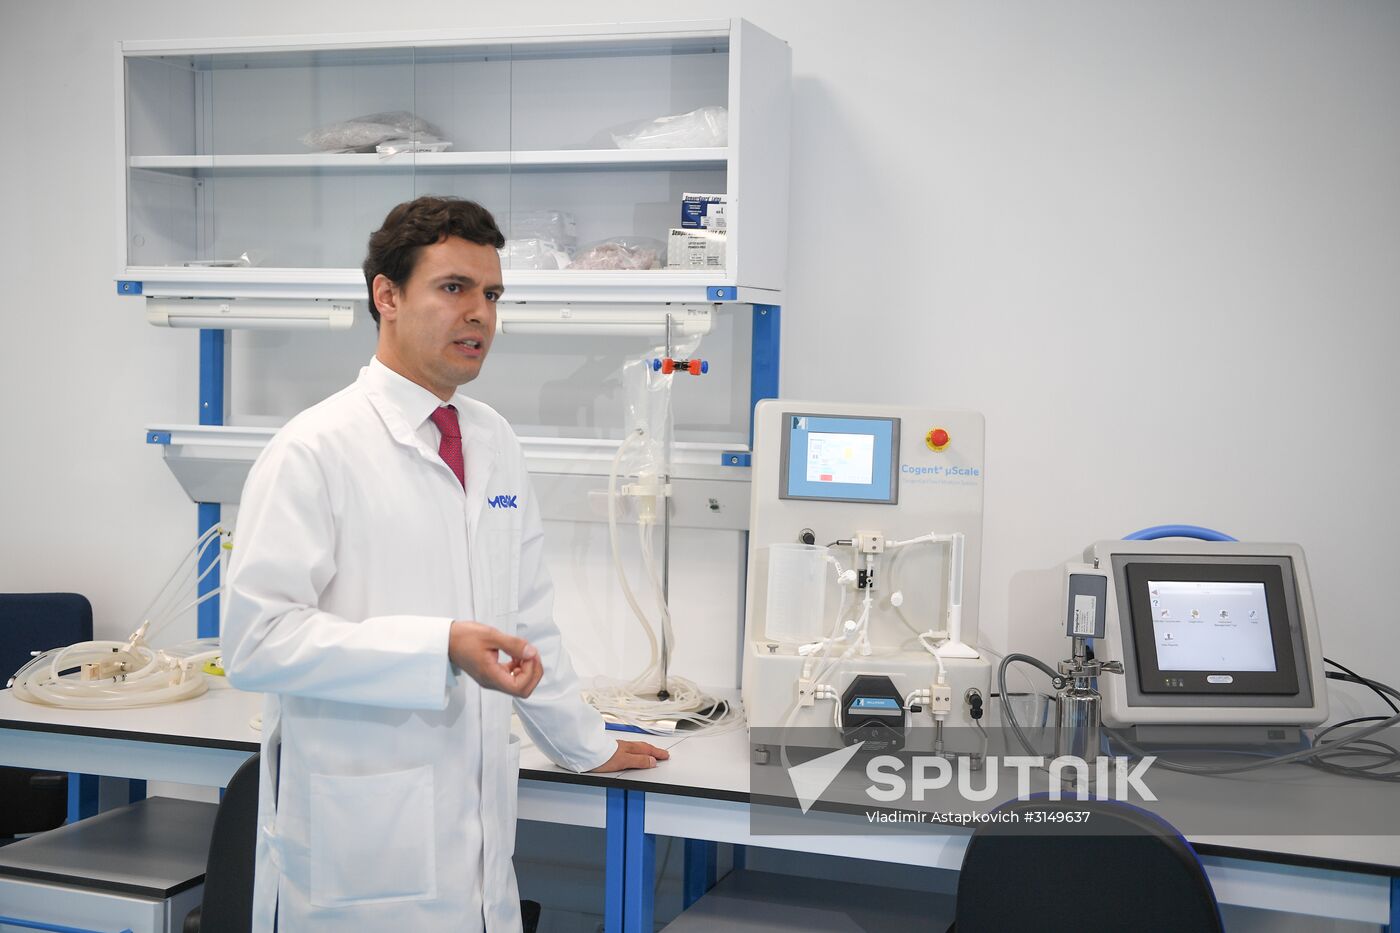 New Life Science laboratory opens in Moscow